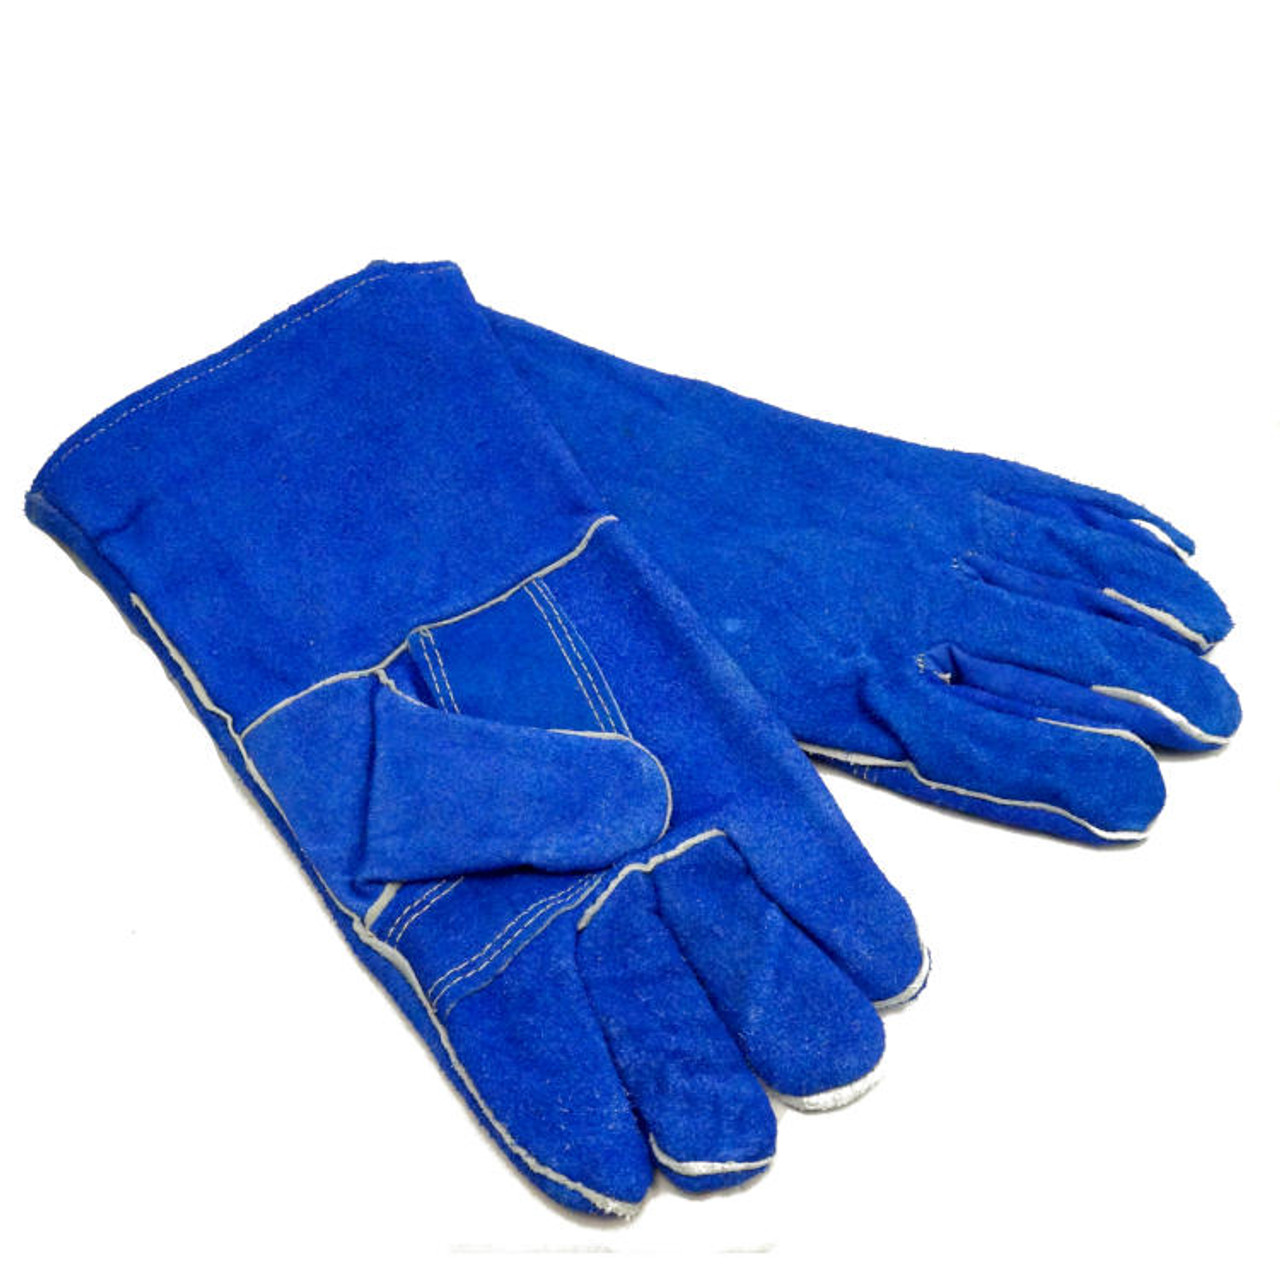 HANDLDNAY Synthetic Leather with Silicone Grip Coating Mechanic Glove,  Breathable Utility Work Gloves, Medium, Blue-Upgrade 